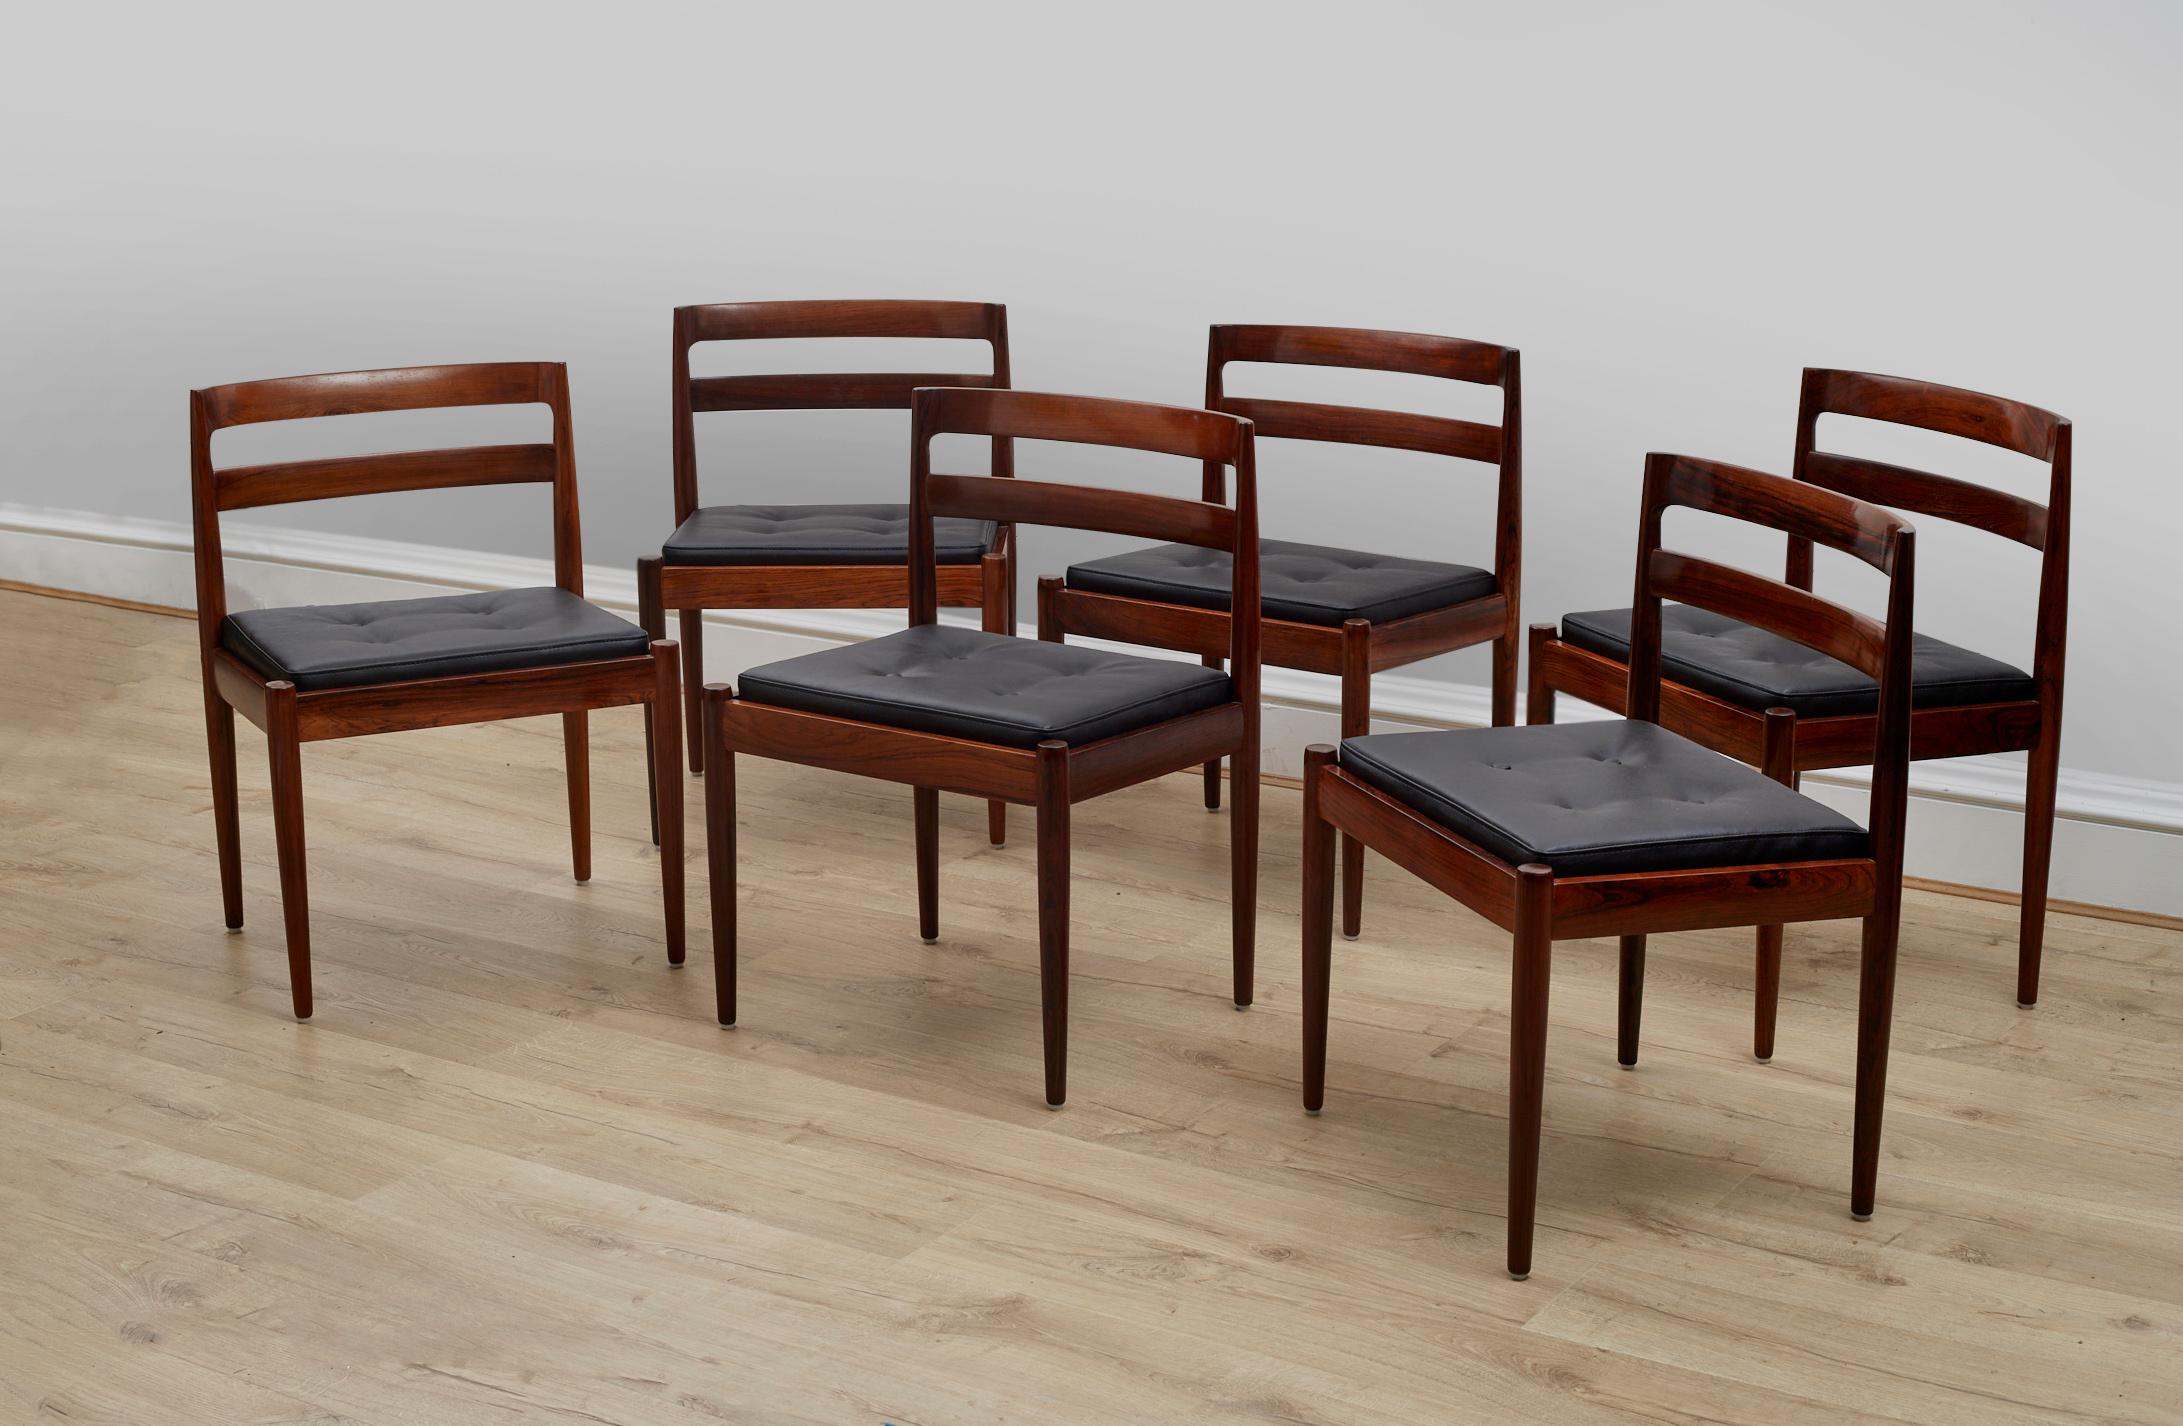 A stunning set of 6 model 301 Danish dining chairs by Kai Kristiansen in solid rosewood. This was made in Denmark by Magnus Olsen and dates from the 1960’s.

These are a rare and top quality model, with an inset removable leather cushion. The frame